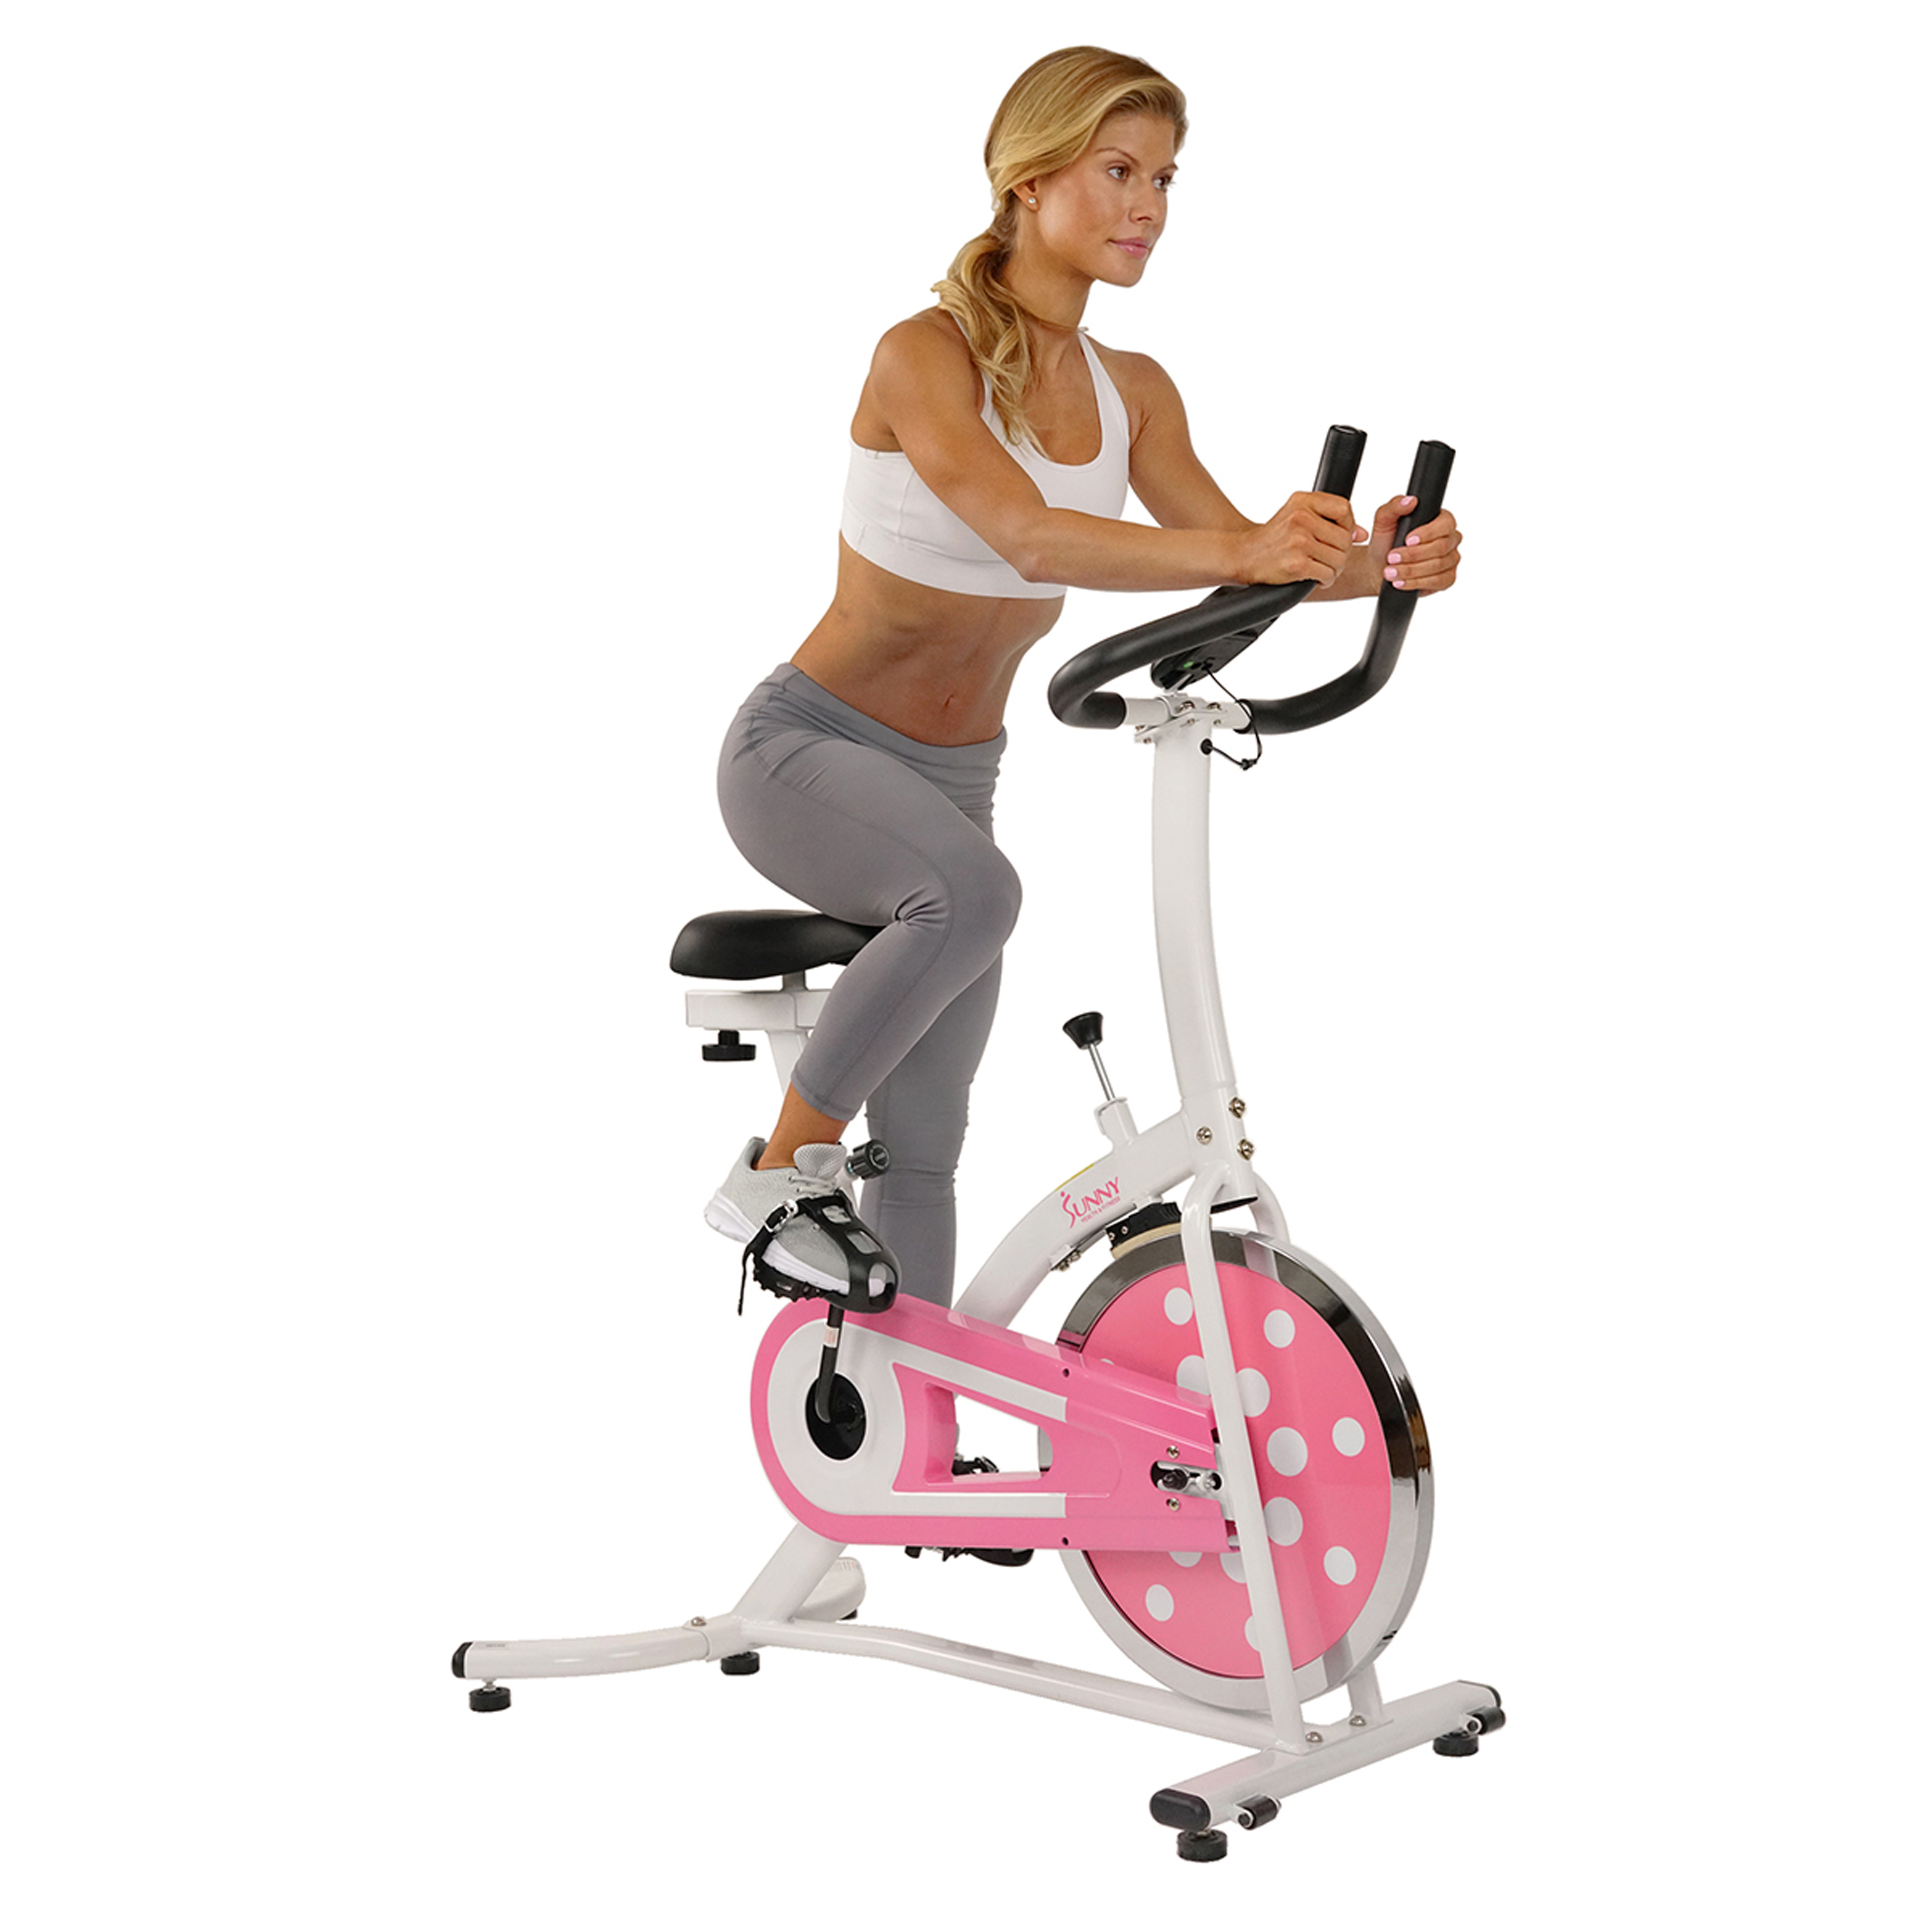 Sunny Health & Fitness P8100 Indoor Cycling Trainer Exercise Stationary Bike